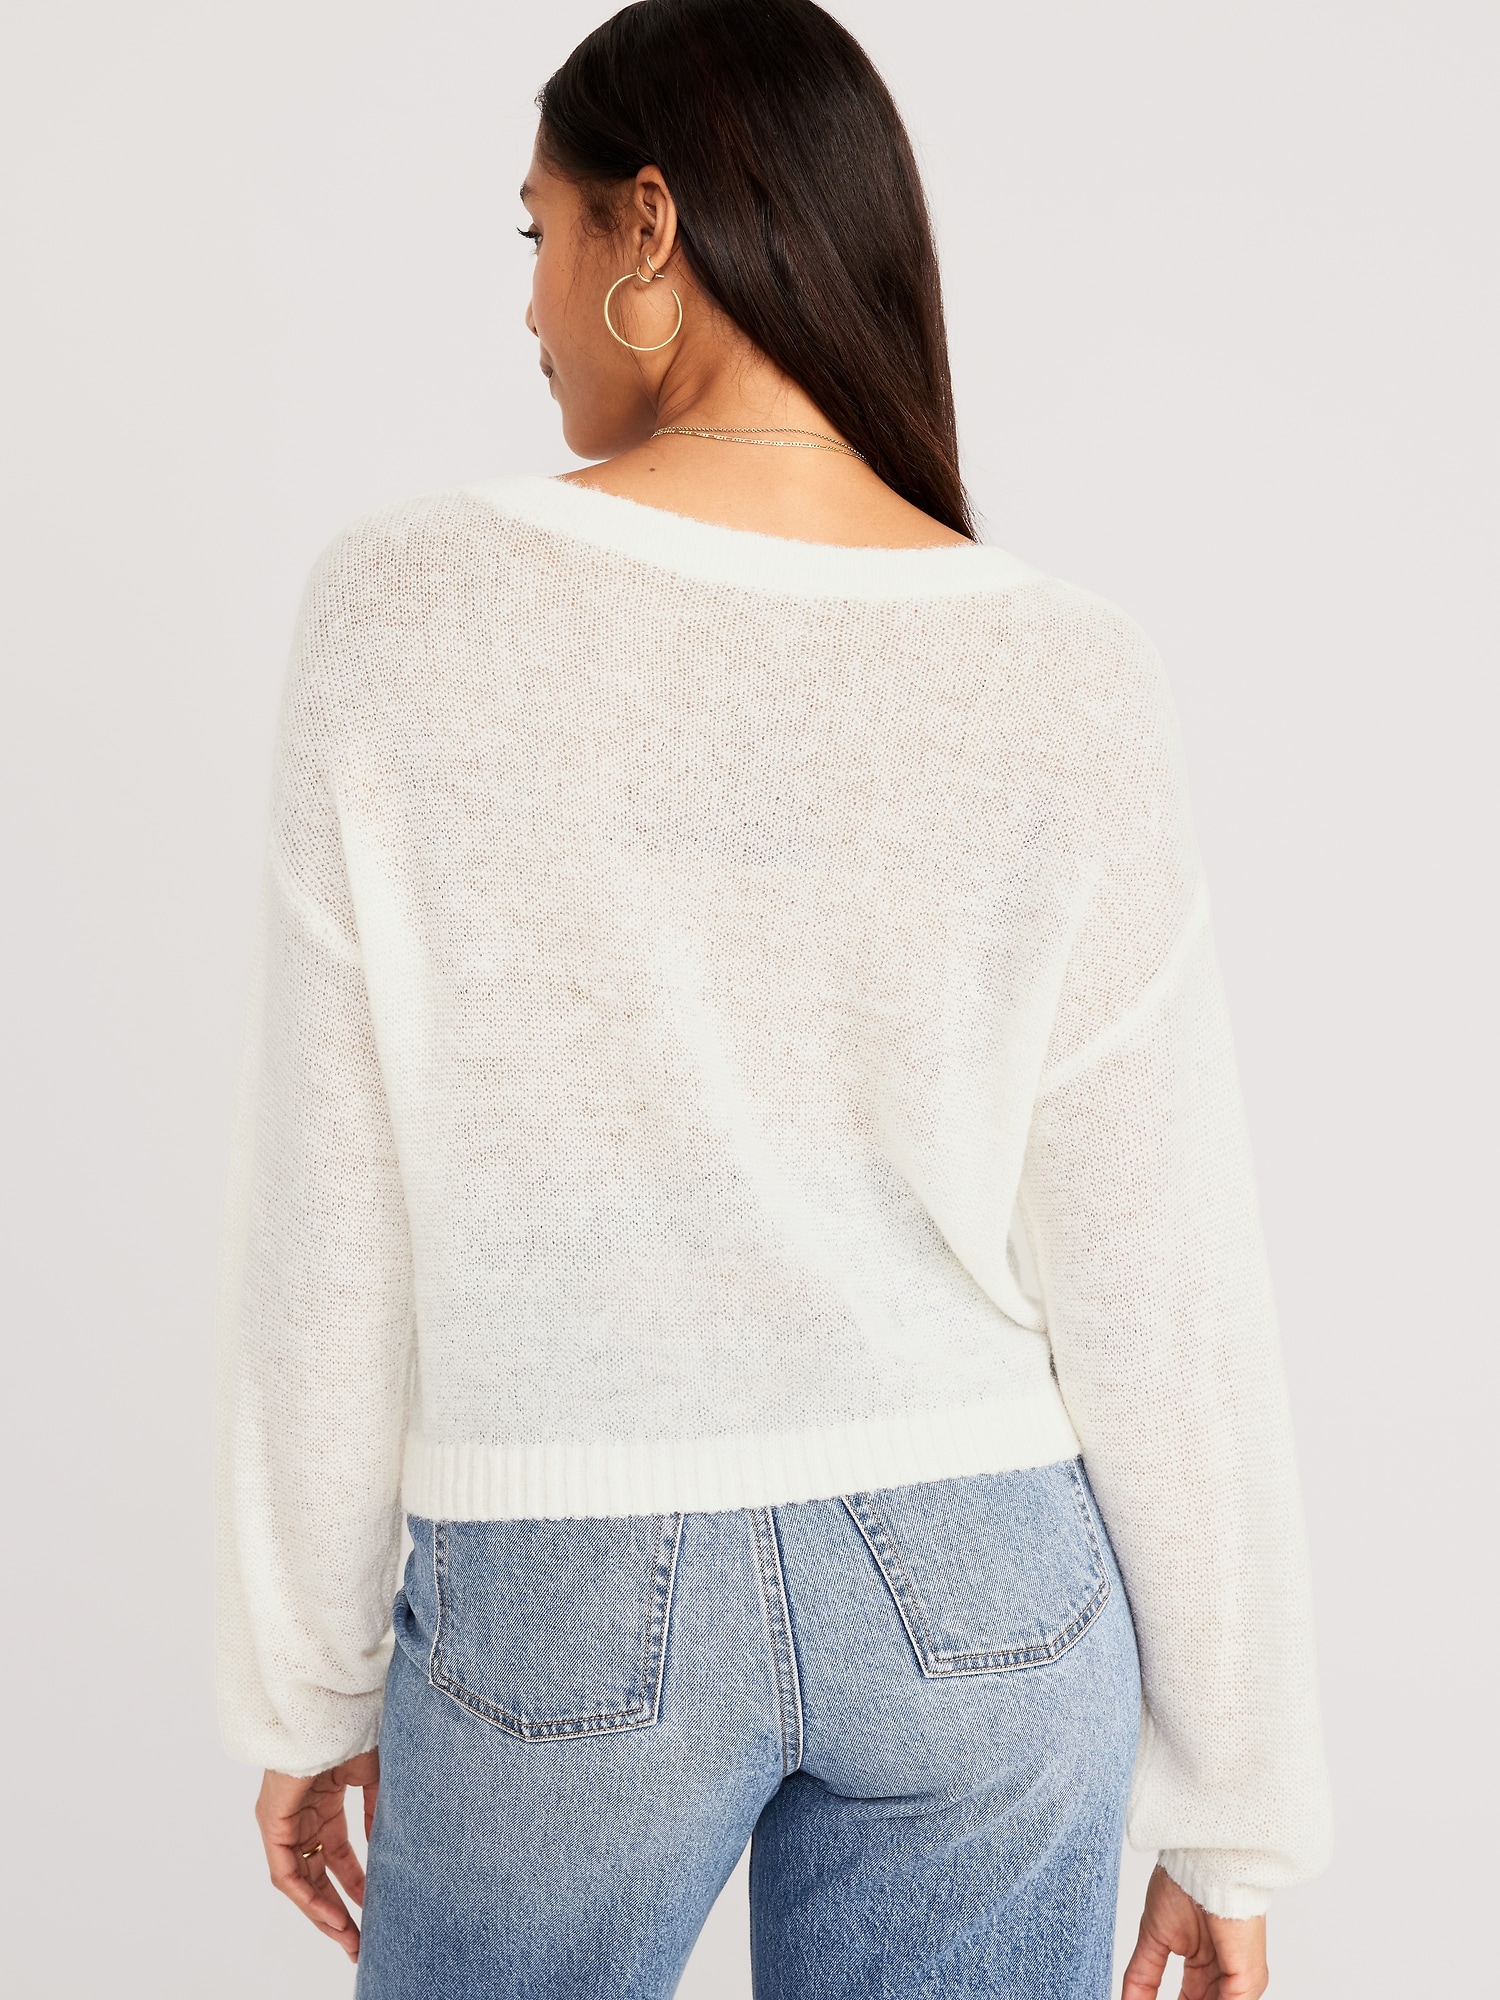 Sheer Boat-Neck Sweater | Old Navy